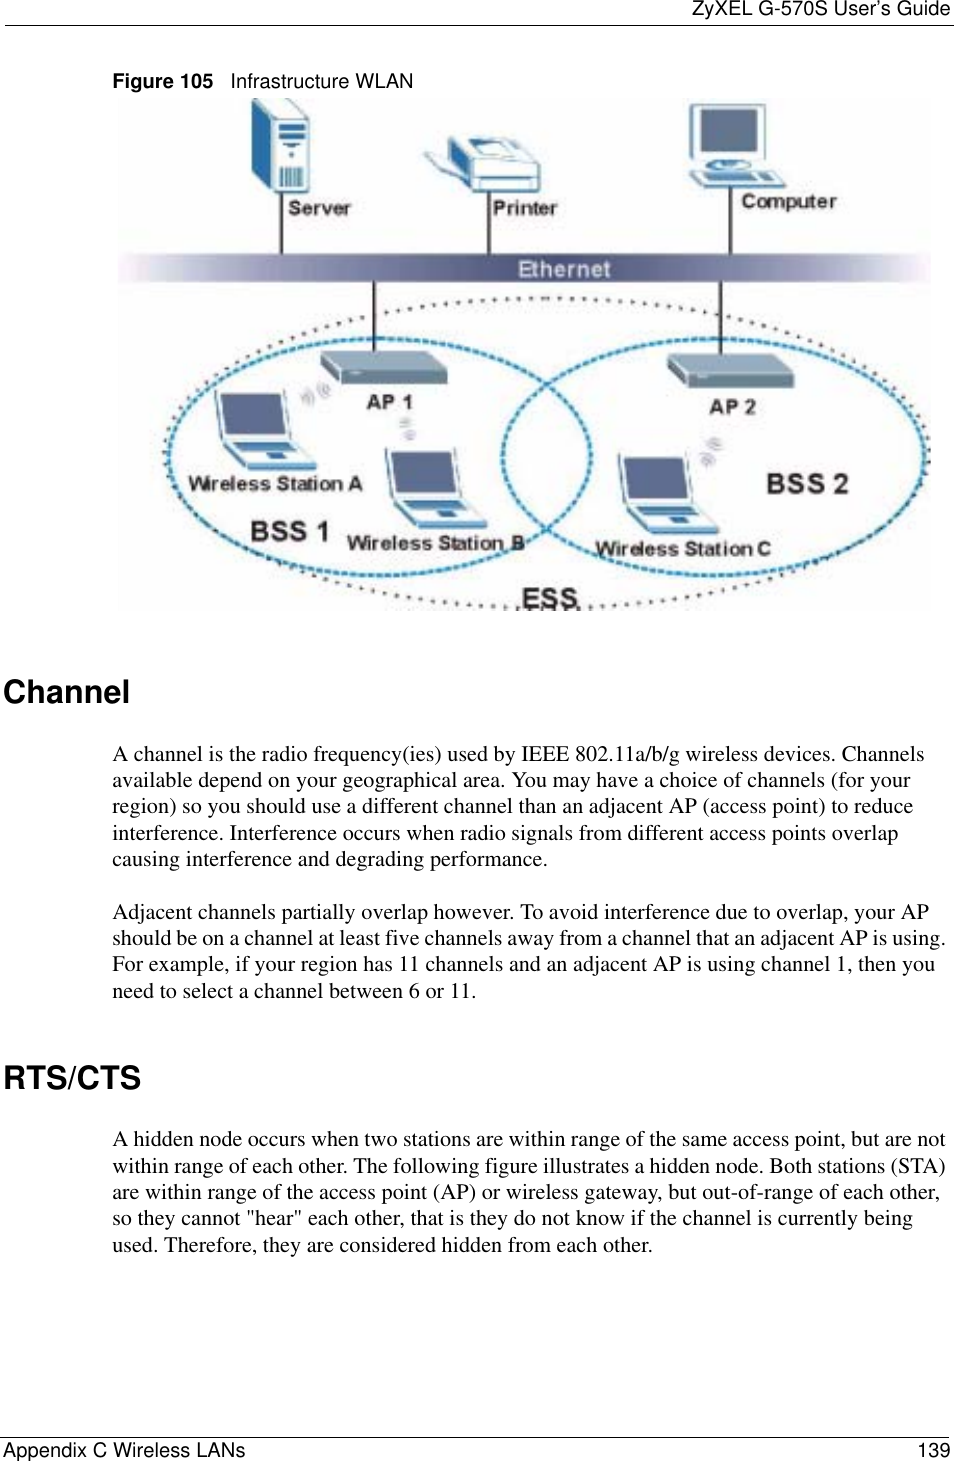 ZyXEL G-570S User’s GuideAppendix C Wireless LANs 139Figure 105   Infrastructure WLANChannelA channel is the radio frequency(ies) used by IEEE 802.11a/b/g wireless devices. Channels available depend on your geographical area. You may have a choice of channels (for your region) so you should use a different channel than an adjacent AP (access point) to reduce interference. Interference occurs when radio signals from different access points overlap causing interference and degrading performance.Adjacent channels partially overlap however. To avoid interference due to overlap, your AP should be on a channel at least five channels away from a channel that an adjacent AP is using. For example, if your region has 11 channels and an adjacent AP is using channel 1, then you need to select a channel between 6 or 11.RTS/CTSA hidden node occurs when two stations are within range of the same access point, but are not within range of each other. The following figure illustrates a hidden node. Both stations (STA) are within range of the access point (AP) or wireless gateway, but out-of-range of each other, so they cannot &quot;hear&quot; each other, that is they do not know if the channel is currently being used. Therefore, they are considered hidden from each other. 